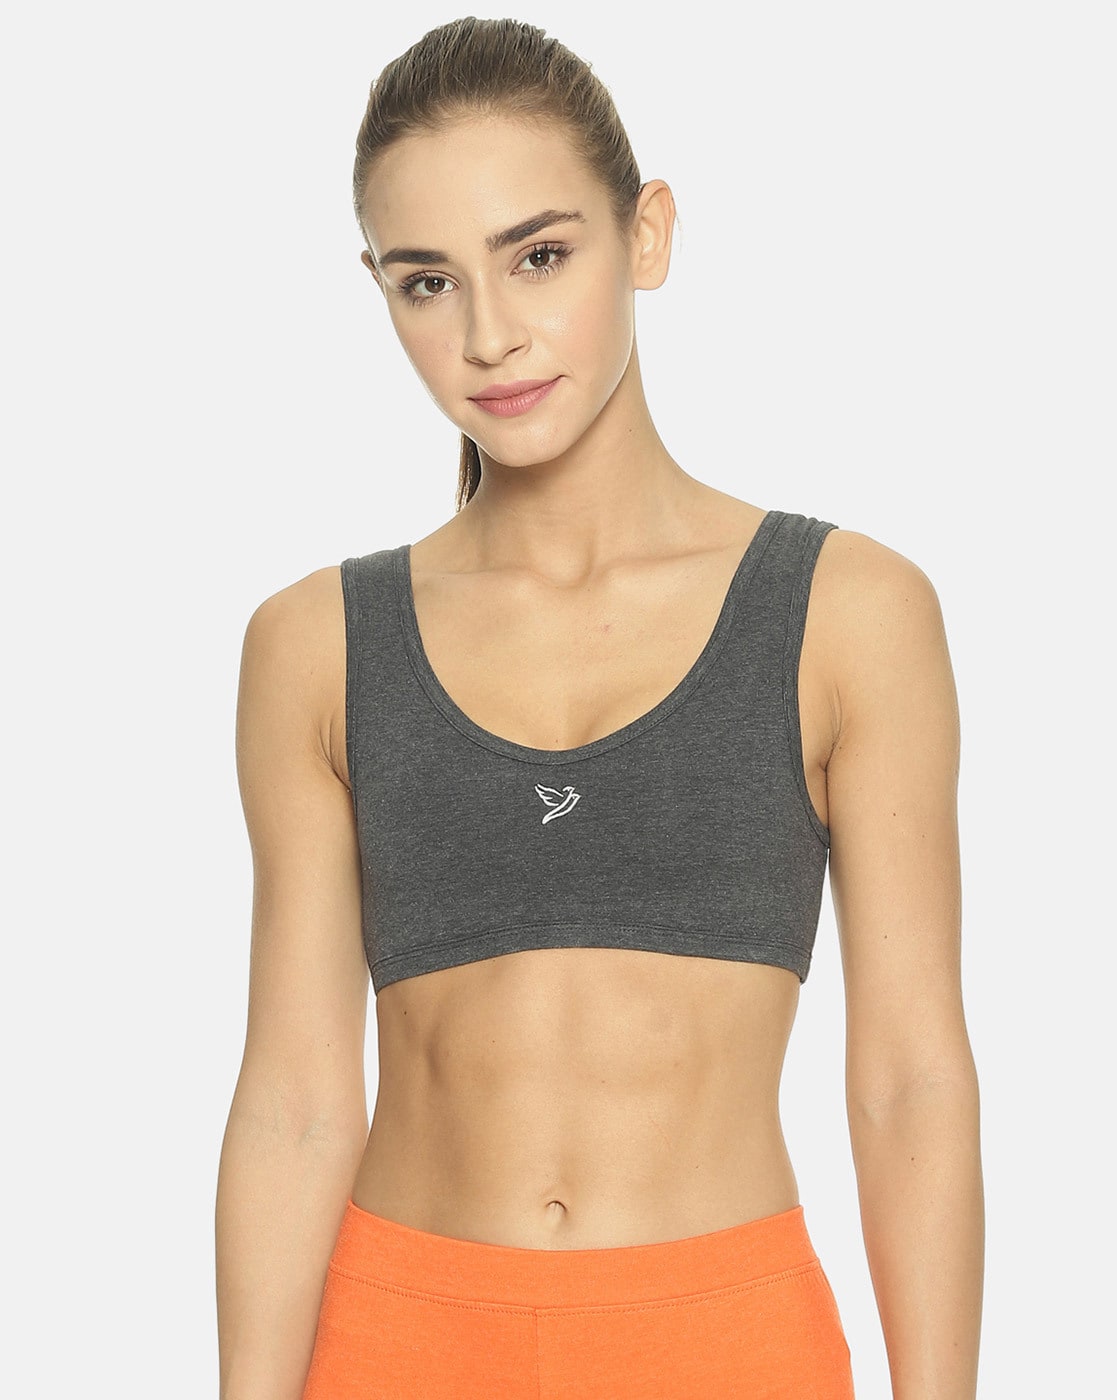 Buy Twin Birds White Cotton Sports Bra Combo Of 2 on Snapdeal